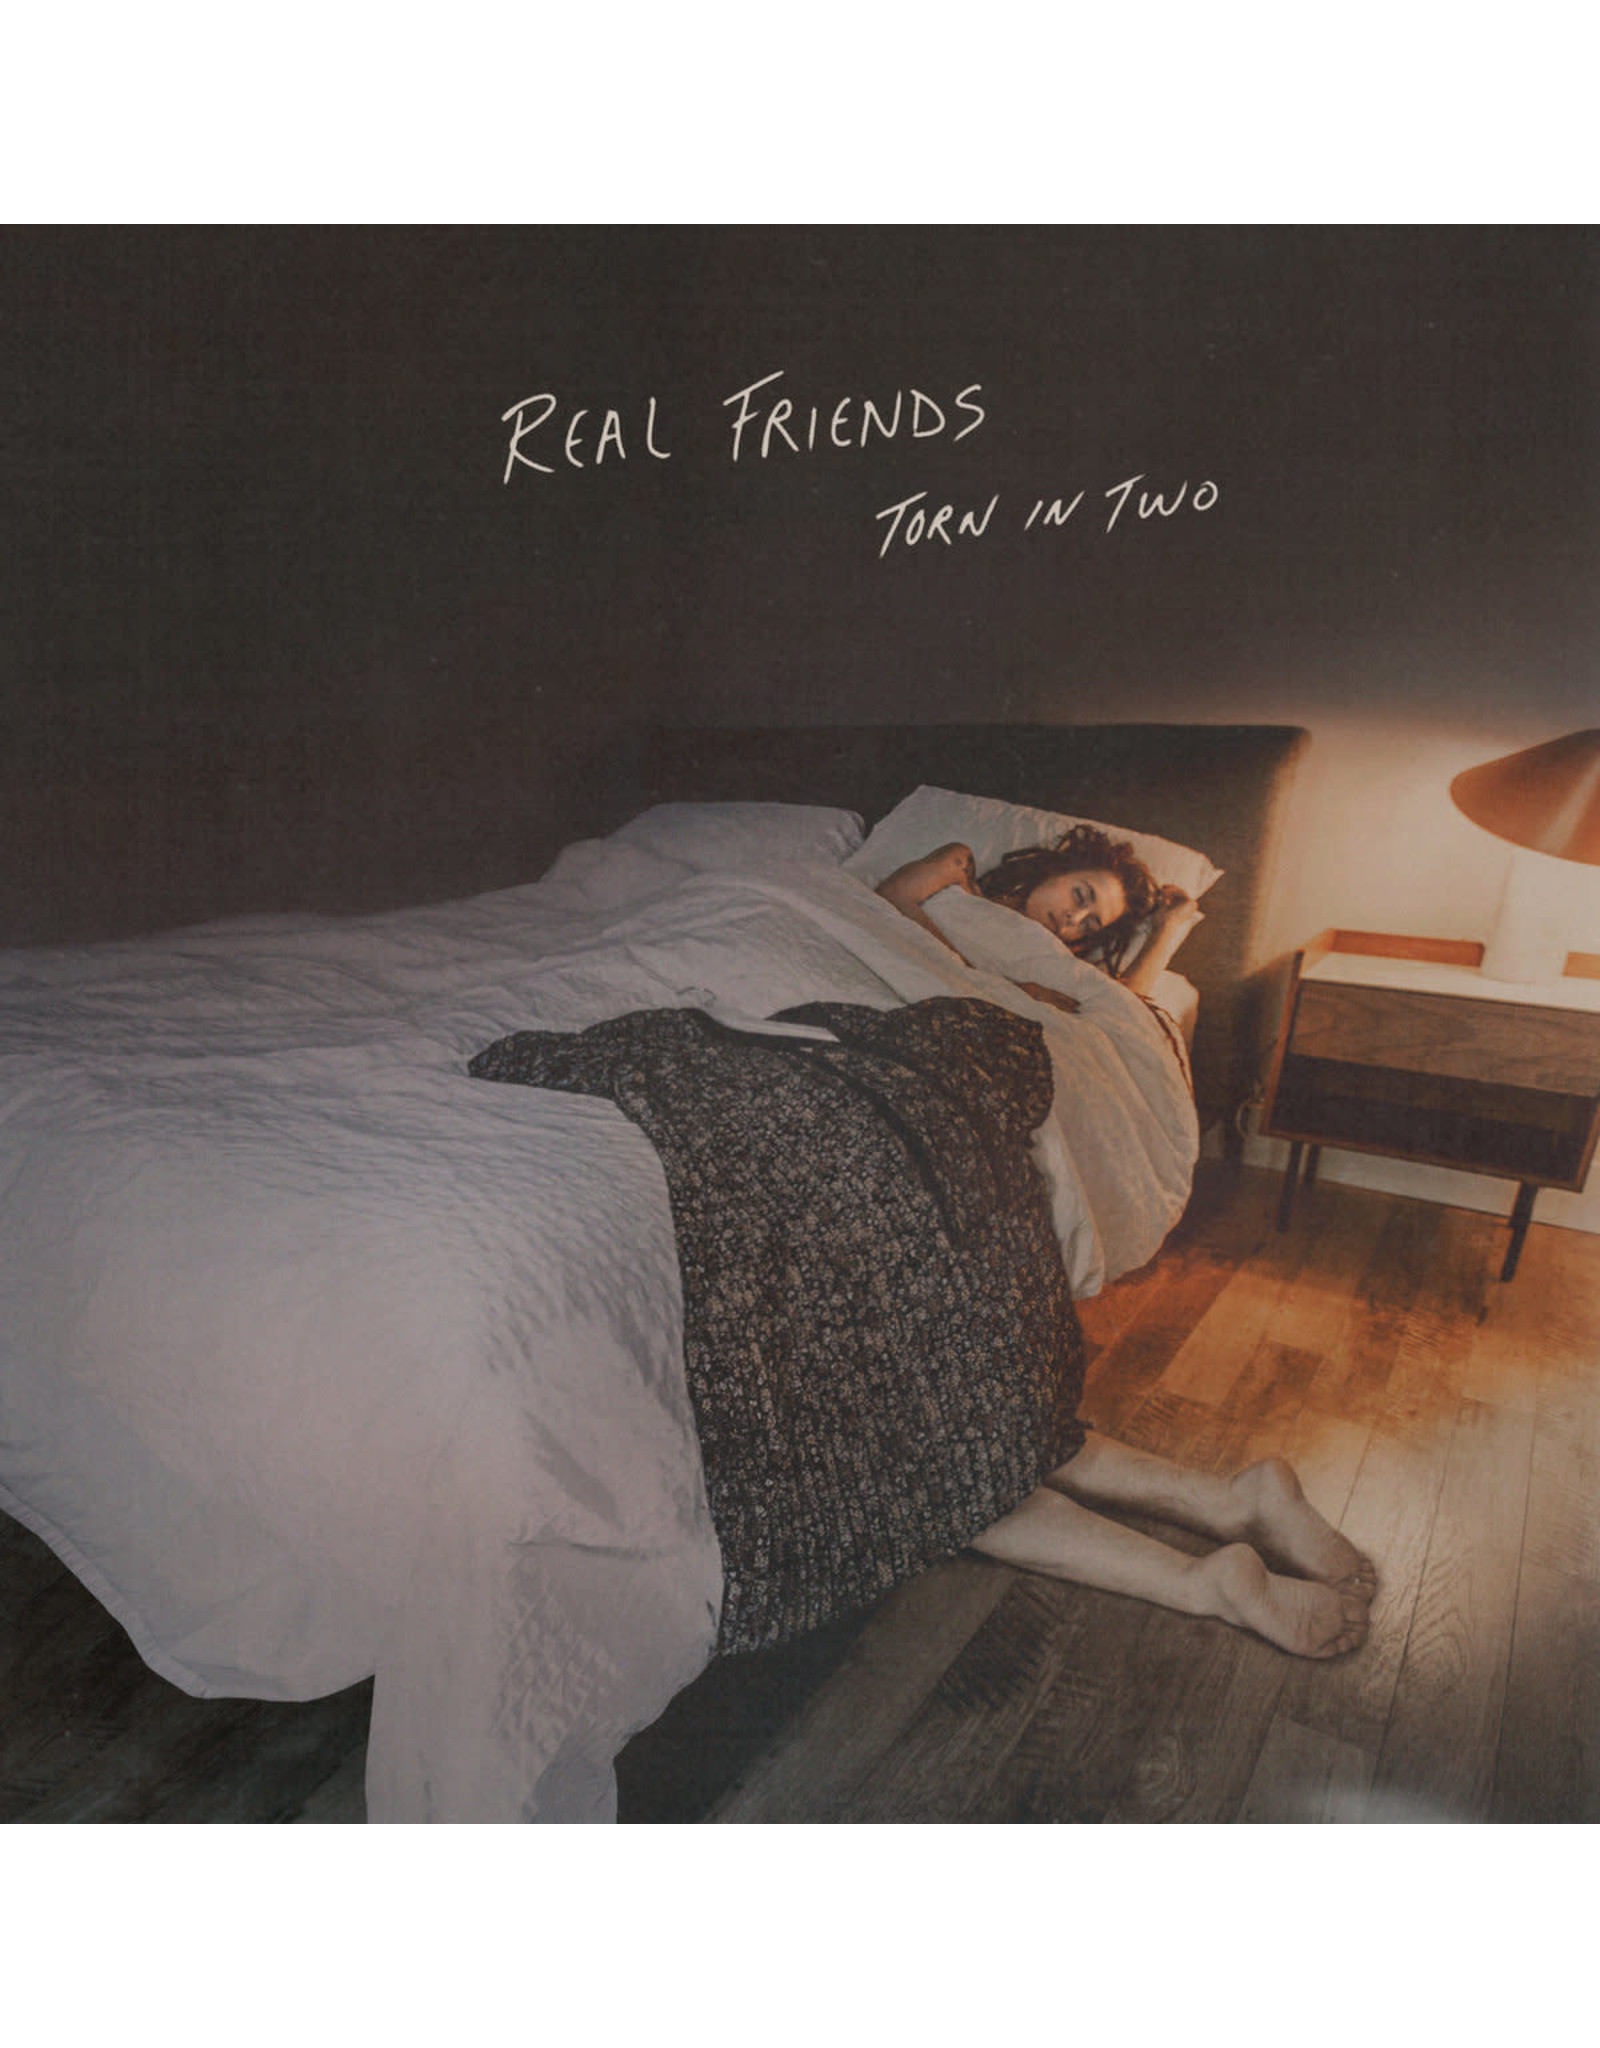 Real Friends - Torn in Two LP (Limited Colour Vinyl)